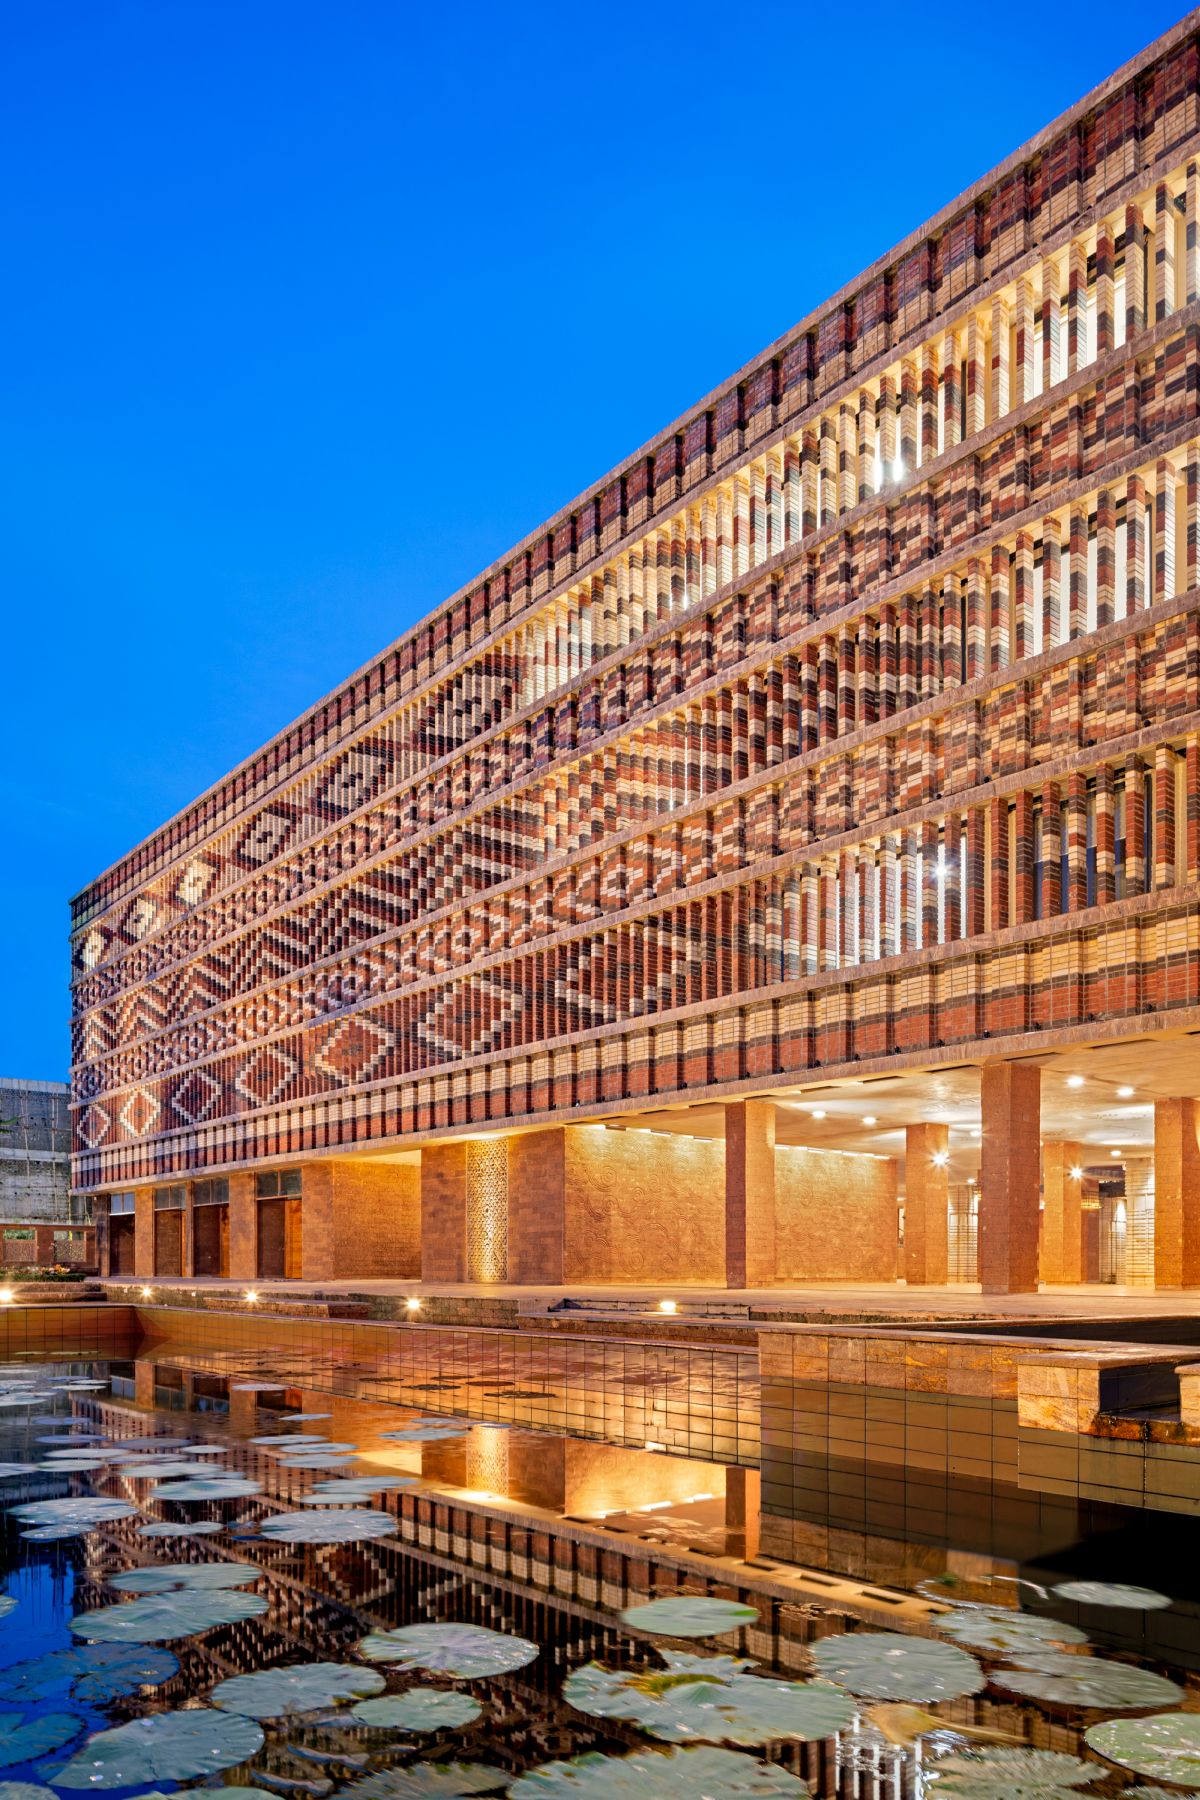 Krushi Bhawan | 150 Local Artisans Come Together to Craft a Civic Building in India, by Studio Lotus 37